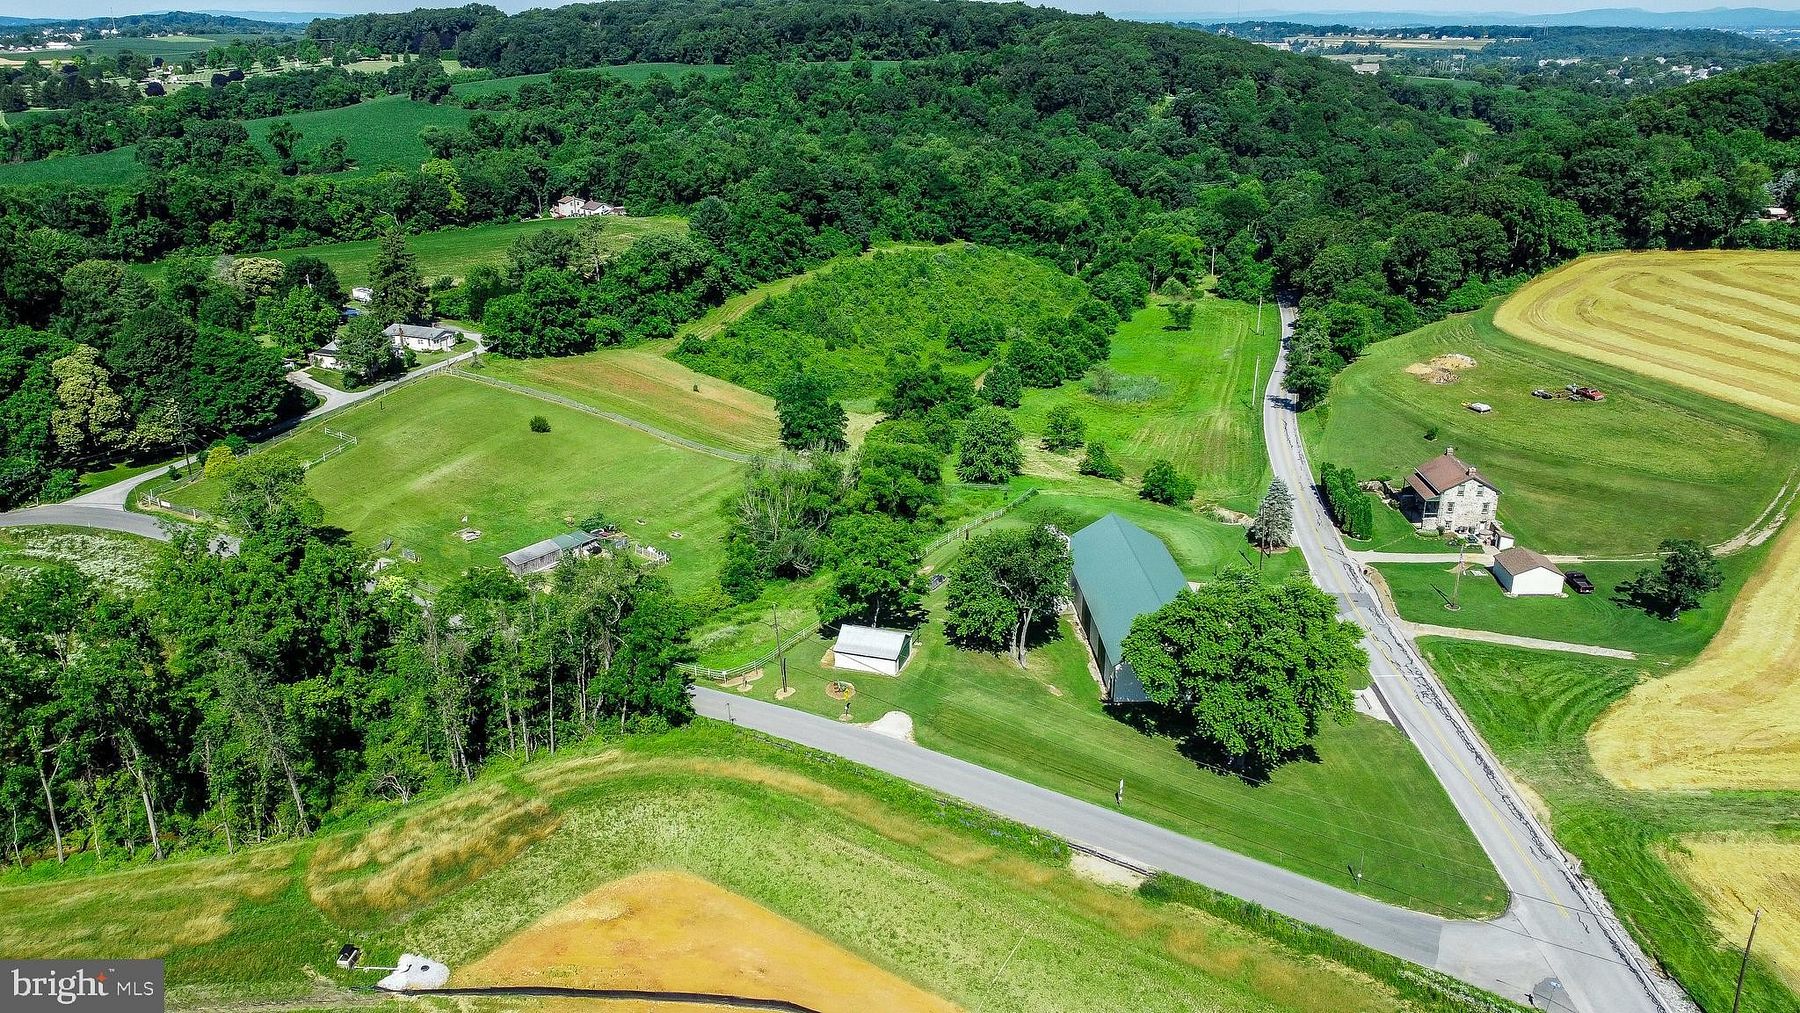 10.1 Acres of Land for Sale in Red Lion, Pennsylvania - LandSearch